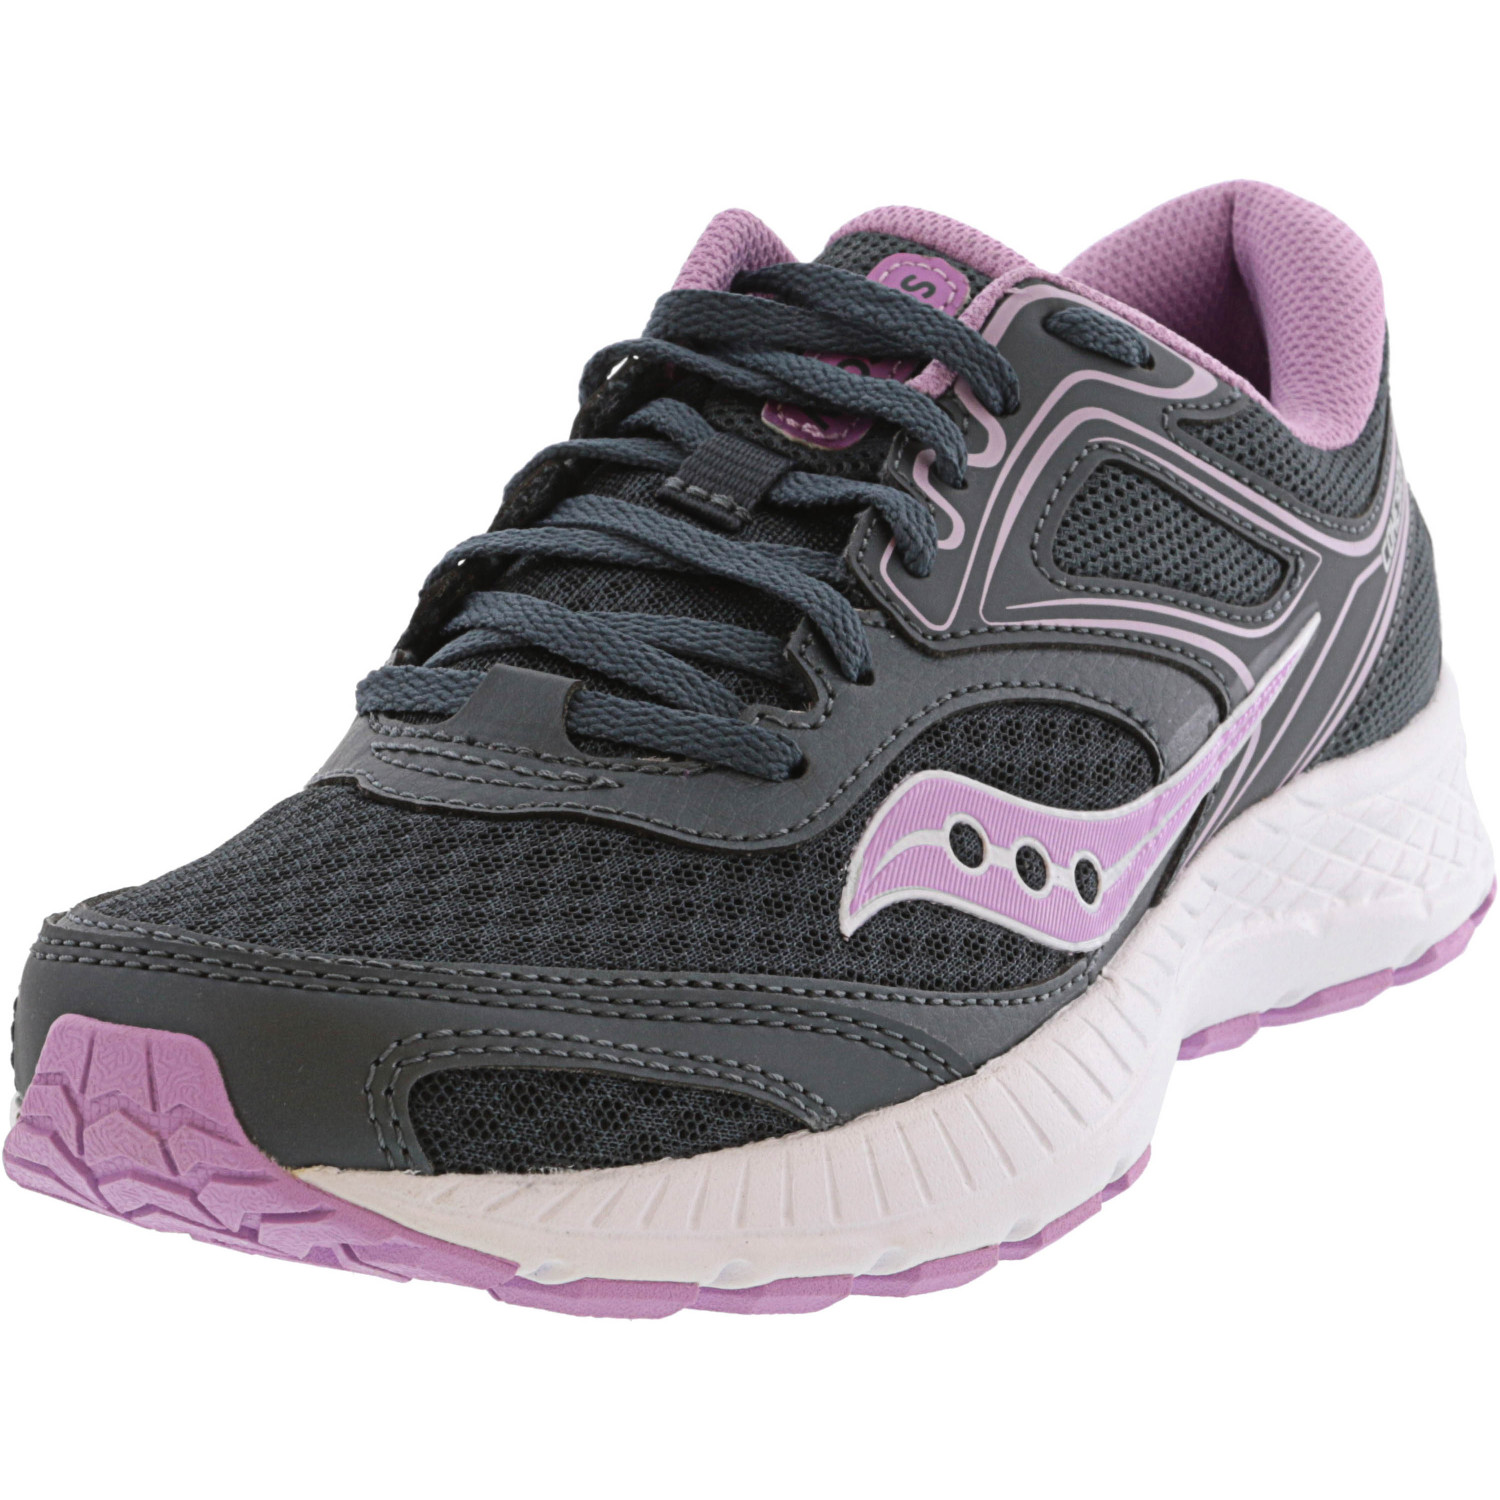 Saucony Women's Versafoam Cohesion 12 Slate / Violet Ankle-High Mesh Running - 10.5M - image 1 of 5